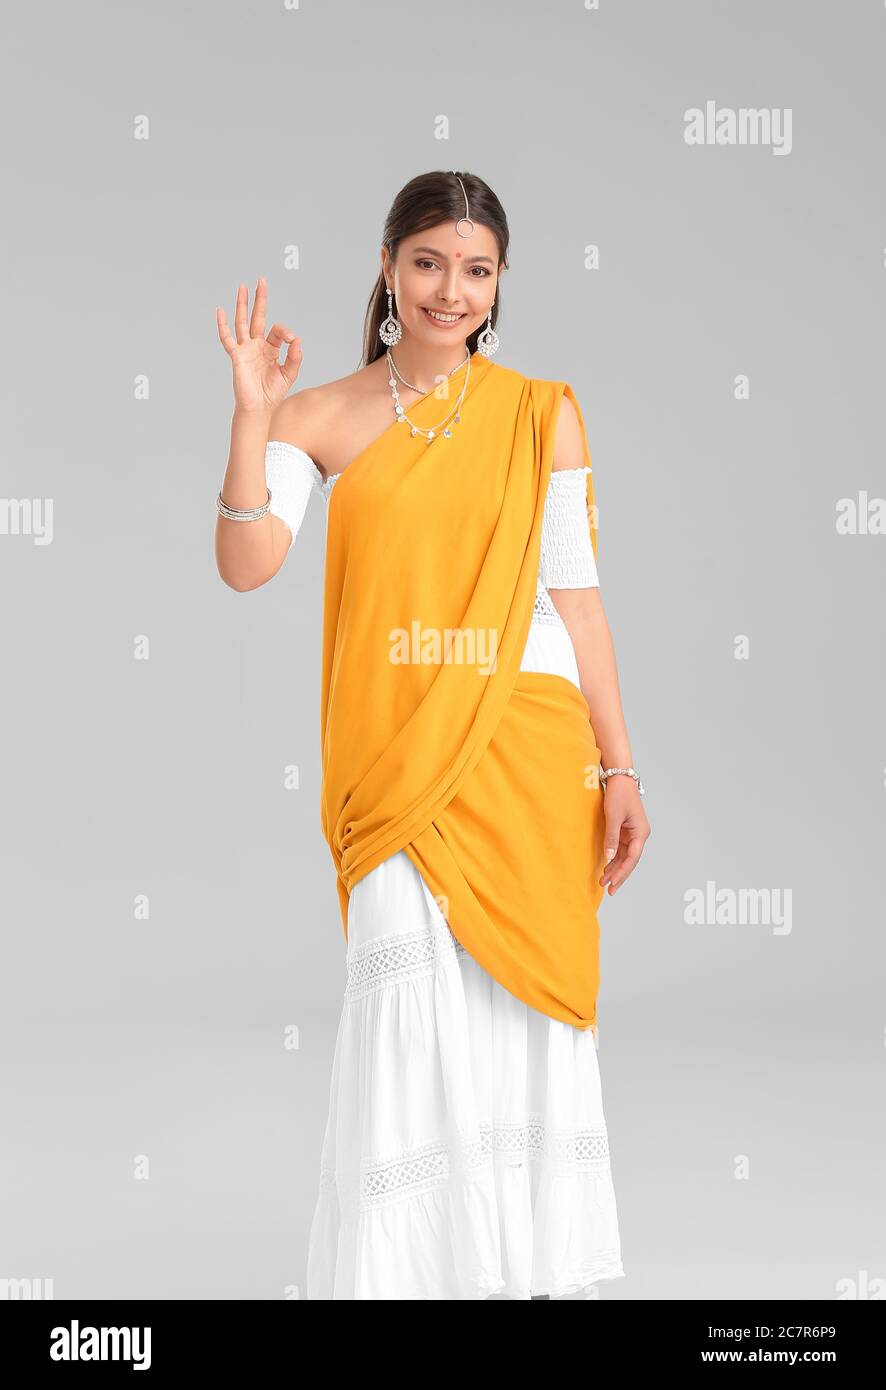 Beautiful Indian Women Wearing Saree Showing Hand Gestures while Smiling.  Stock Image - Image of design, drawing: 191694837